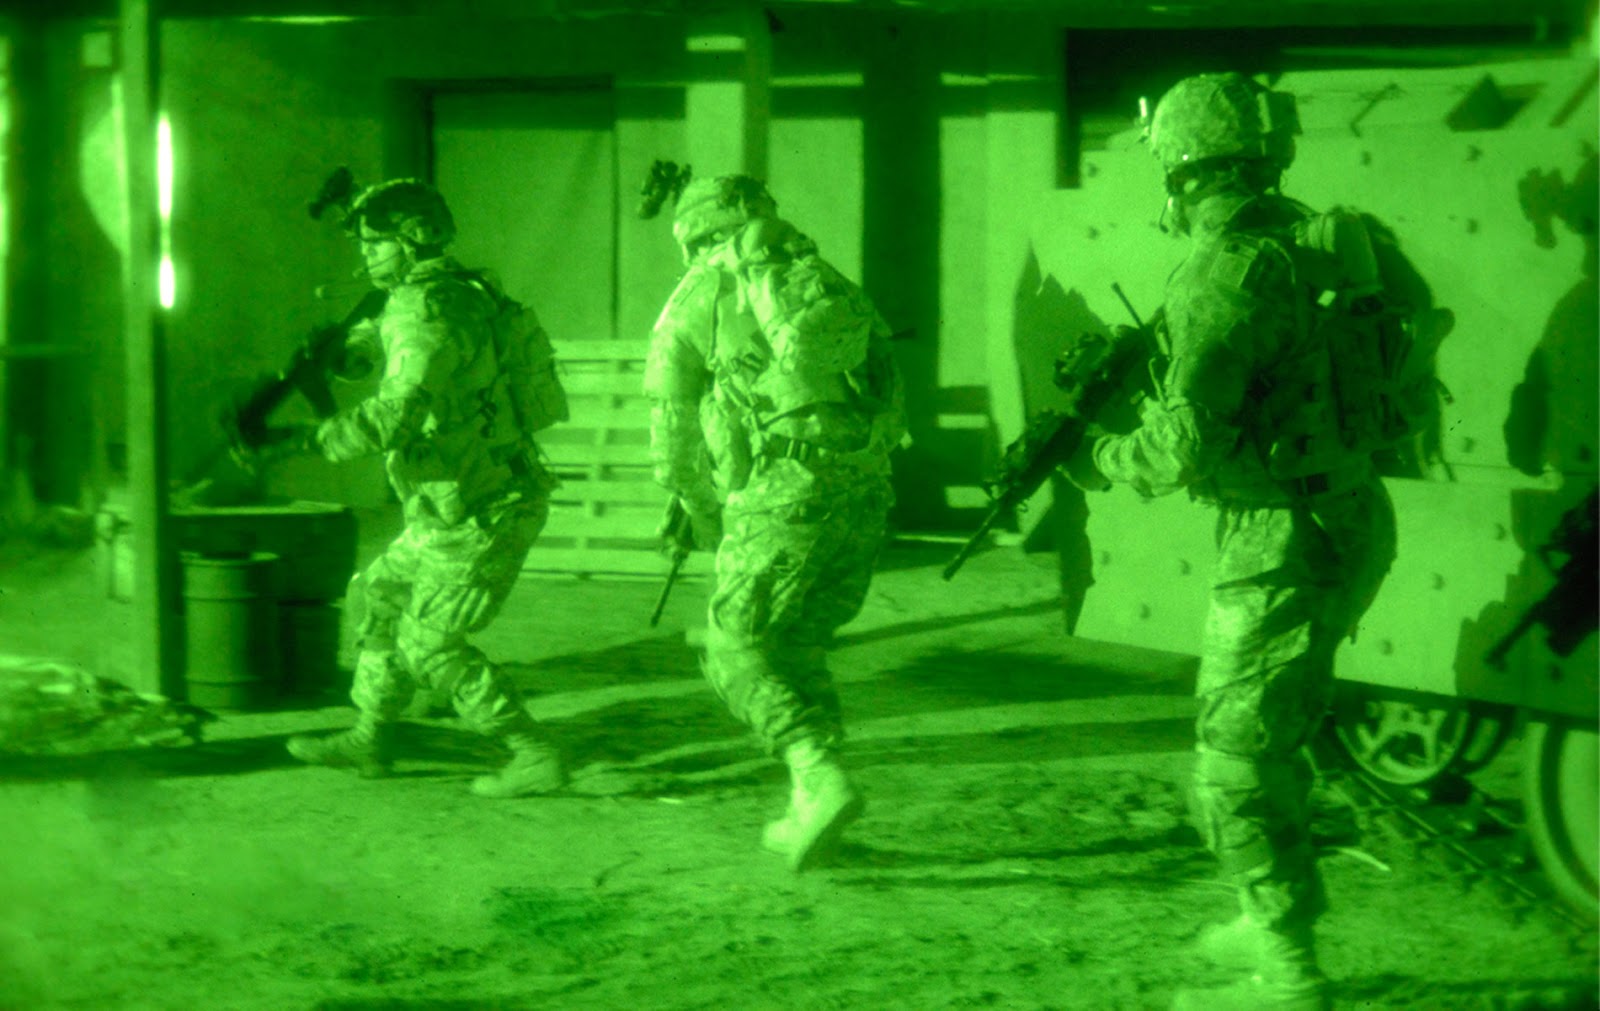 Letter Re: Night Vision Gear and Infrared